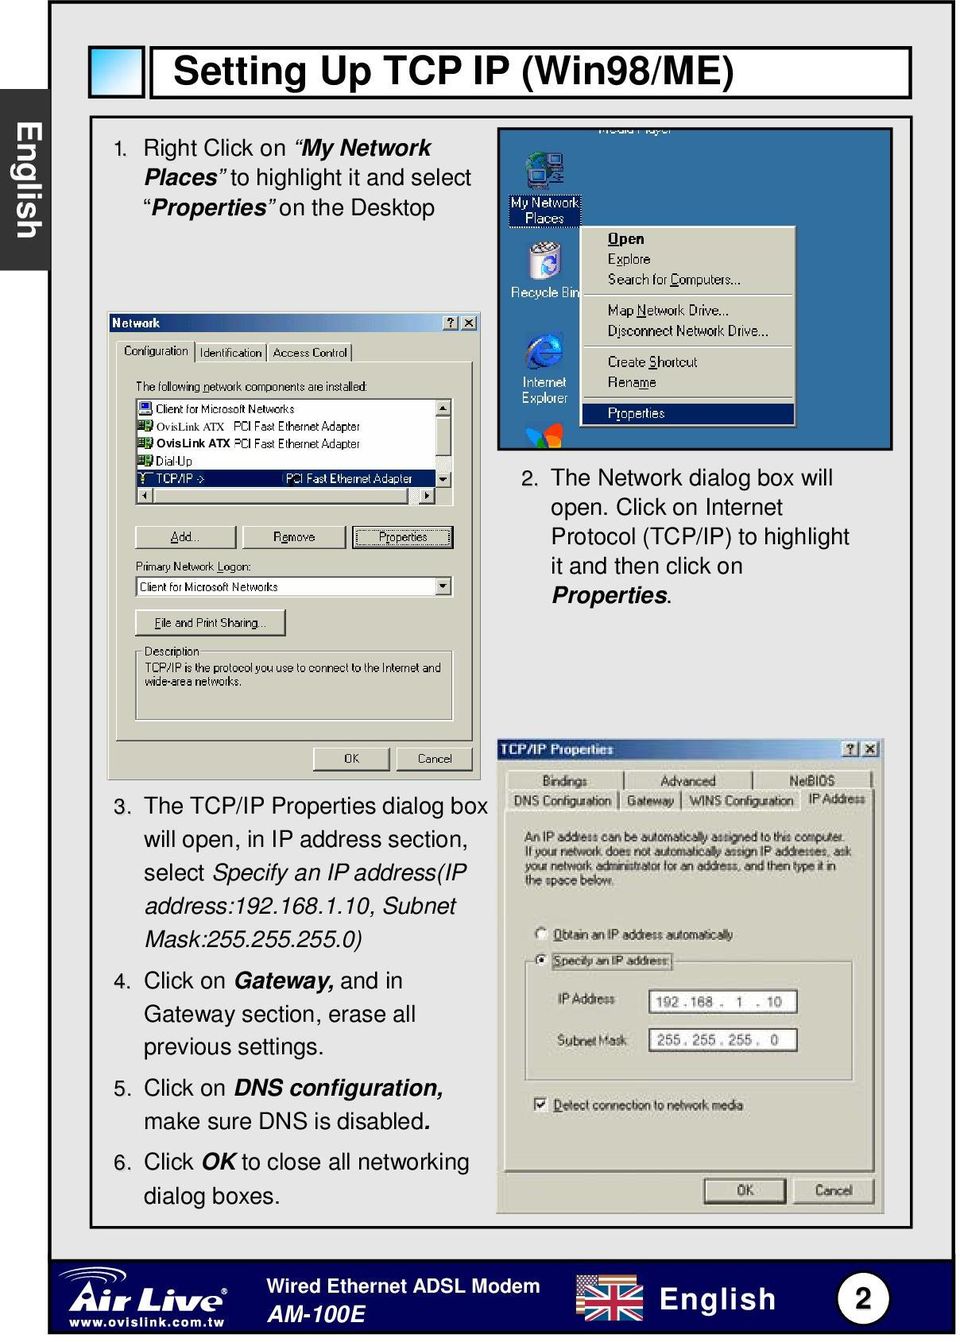 The TCP/IP Properties dialog box will open, in IP address section, select Specify an IP address(ip address:92.68..0, Subnet Mask:255.255.255.0) 4.